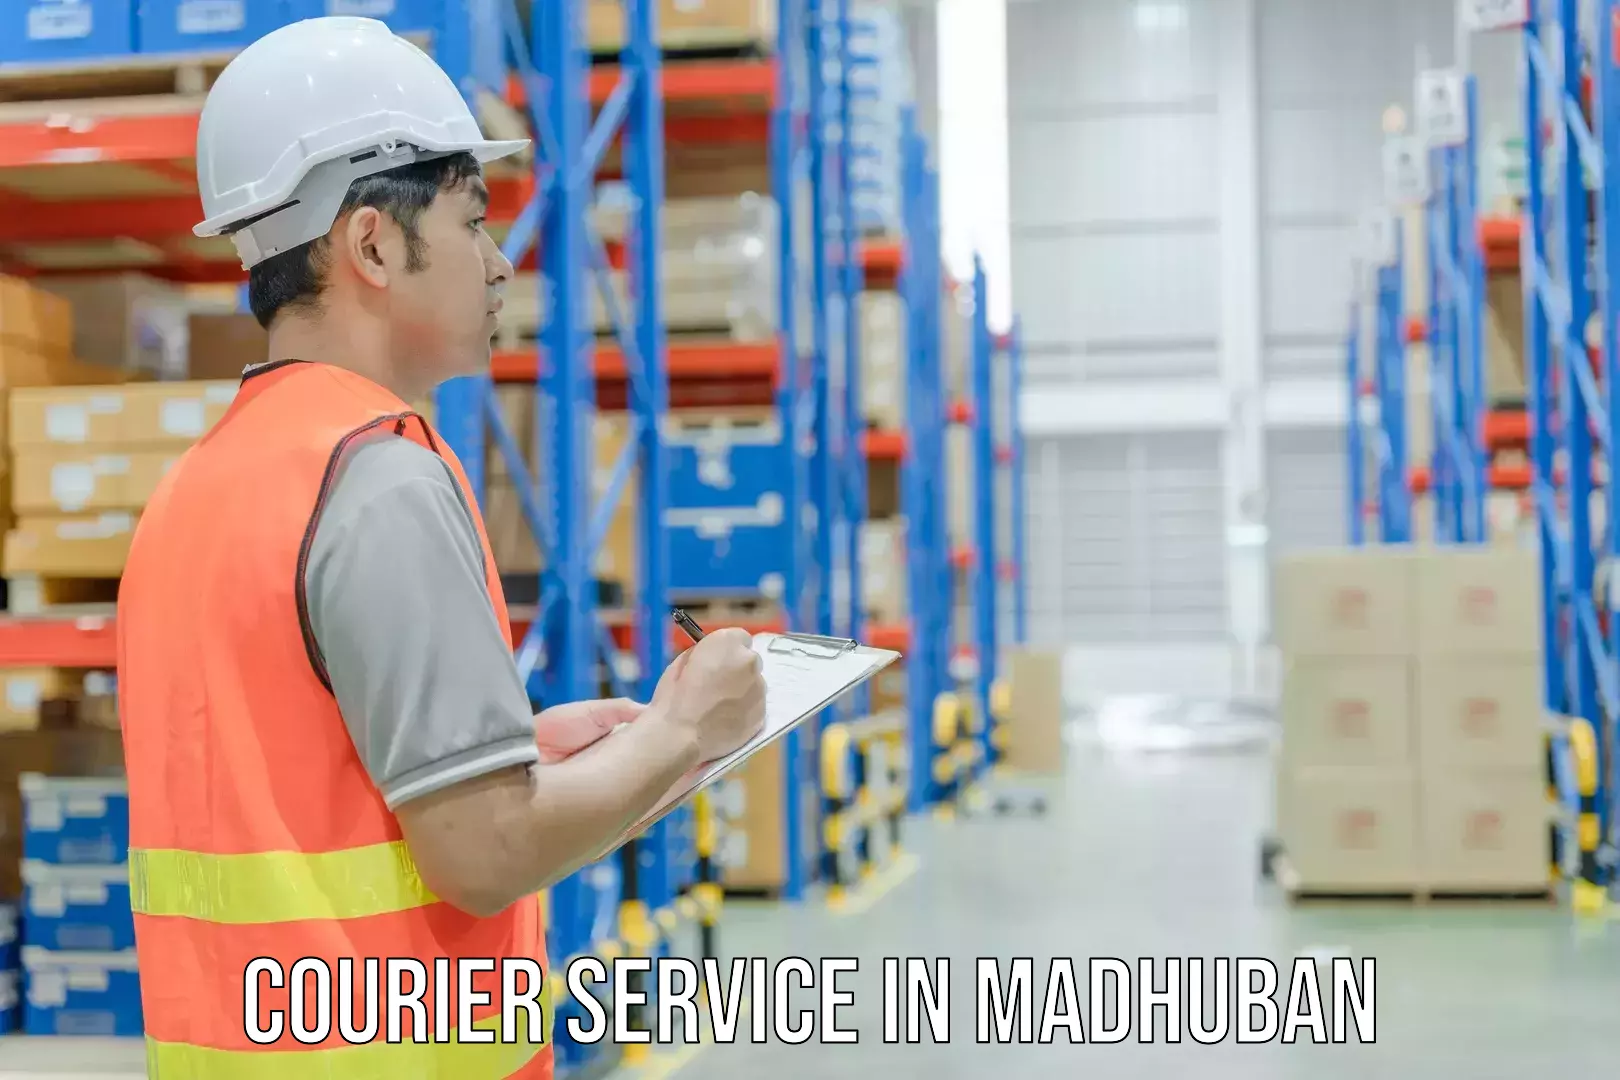 On-demand shipping options in Madhuban